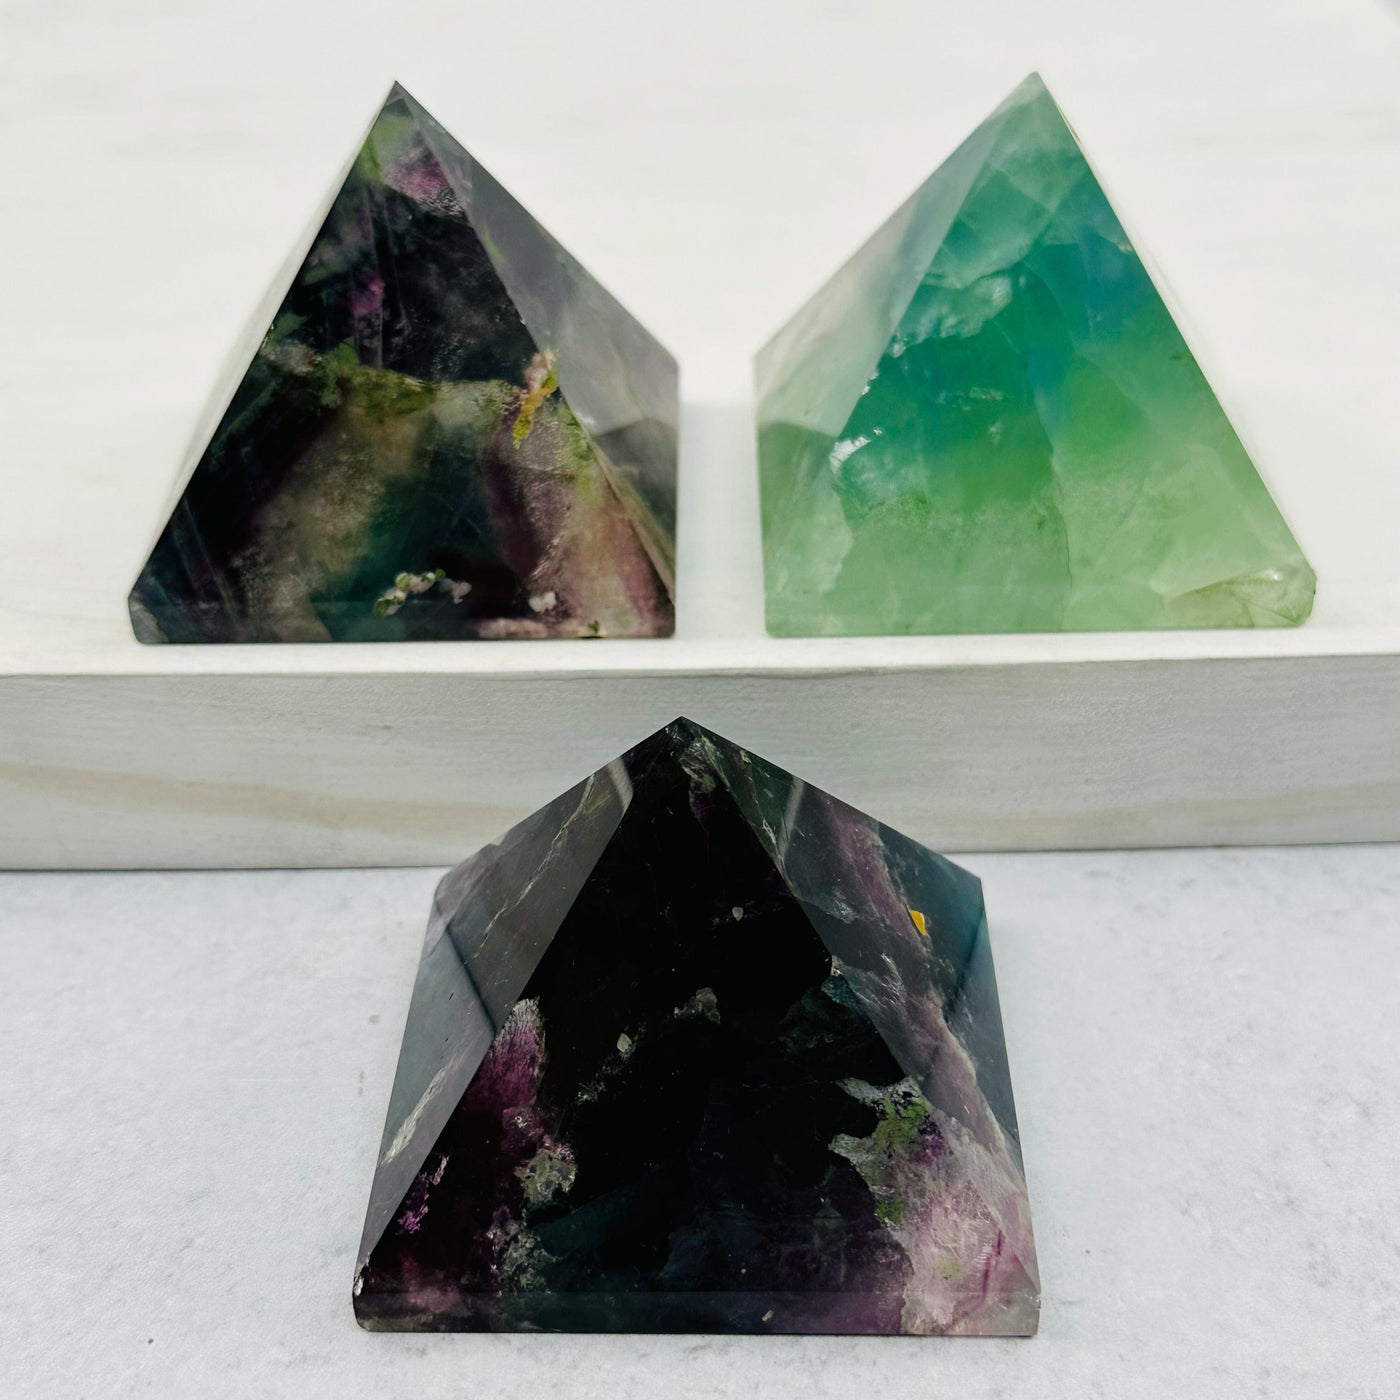 multiple pyramids displayed to show the differences in the color shades